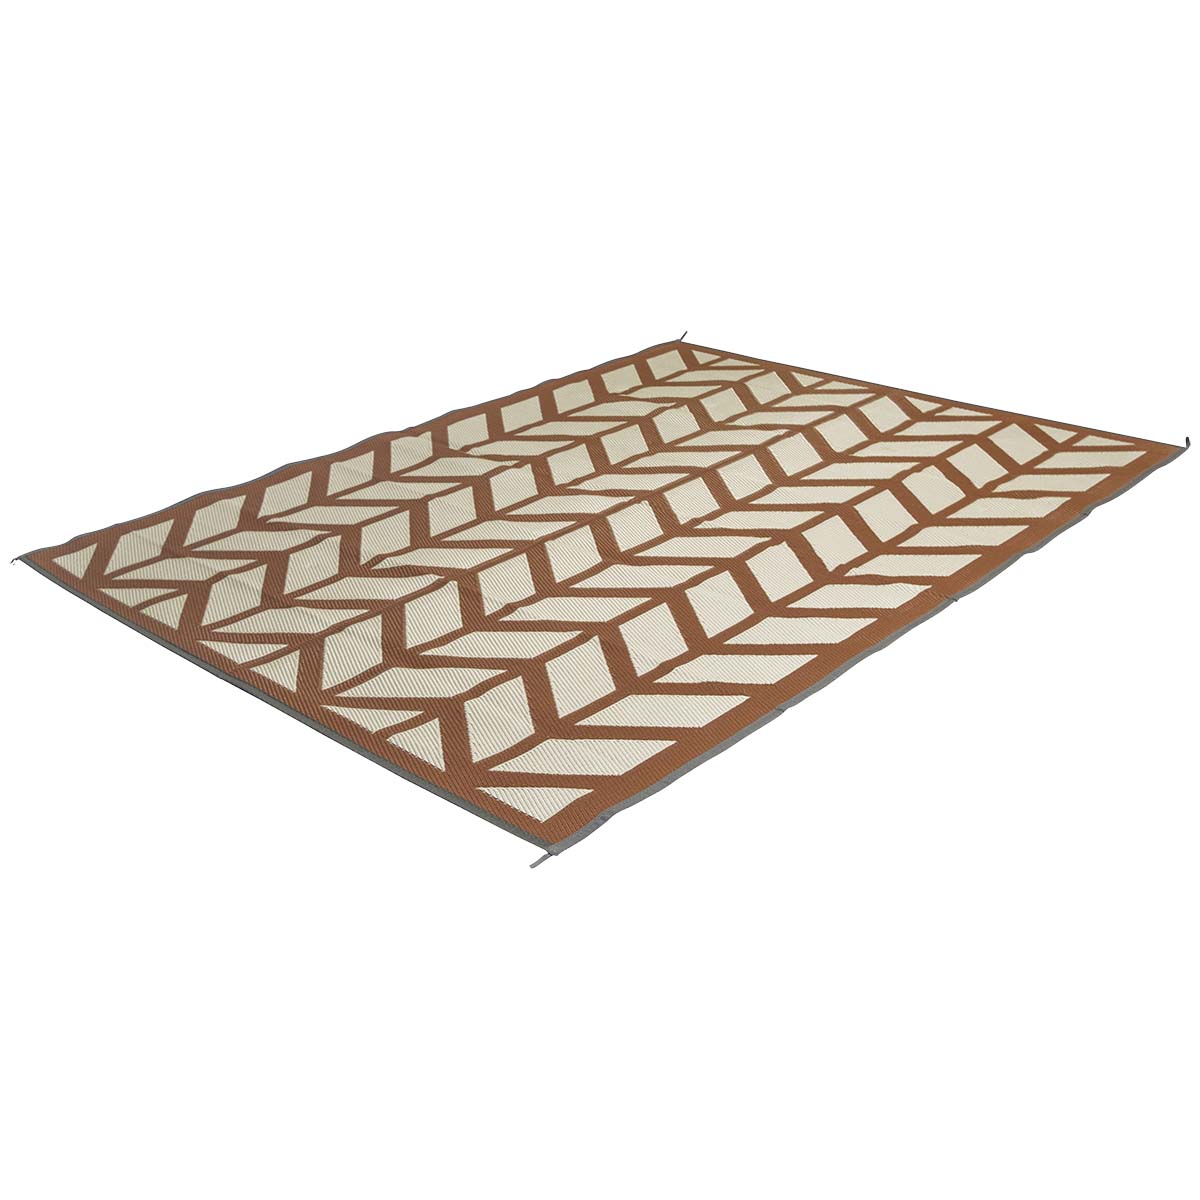 4271074 Bo-Camp - Industrial collection - Chill Mat - Flaxton - Clay - M